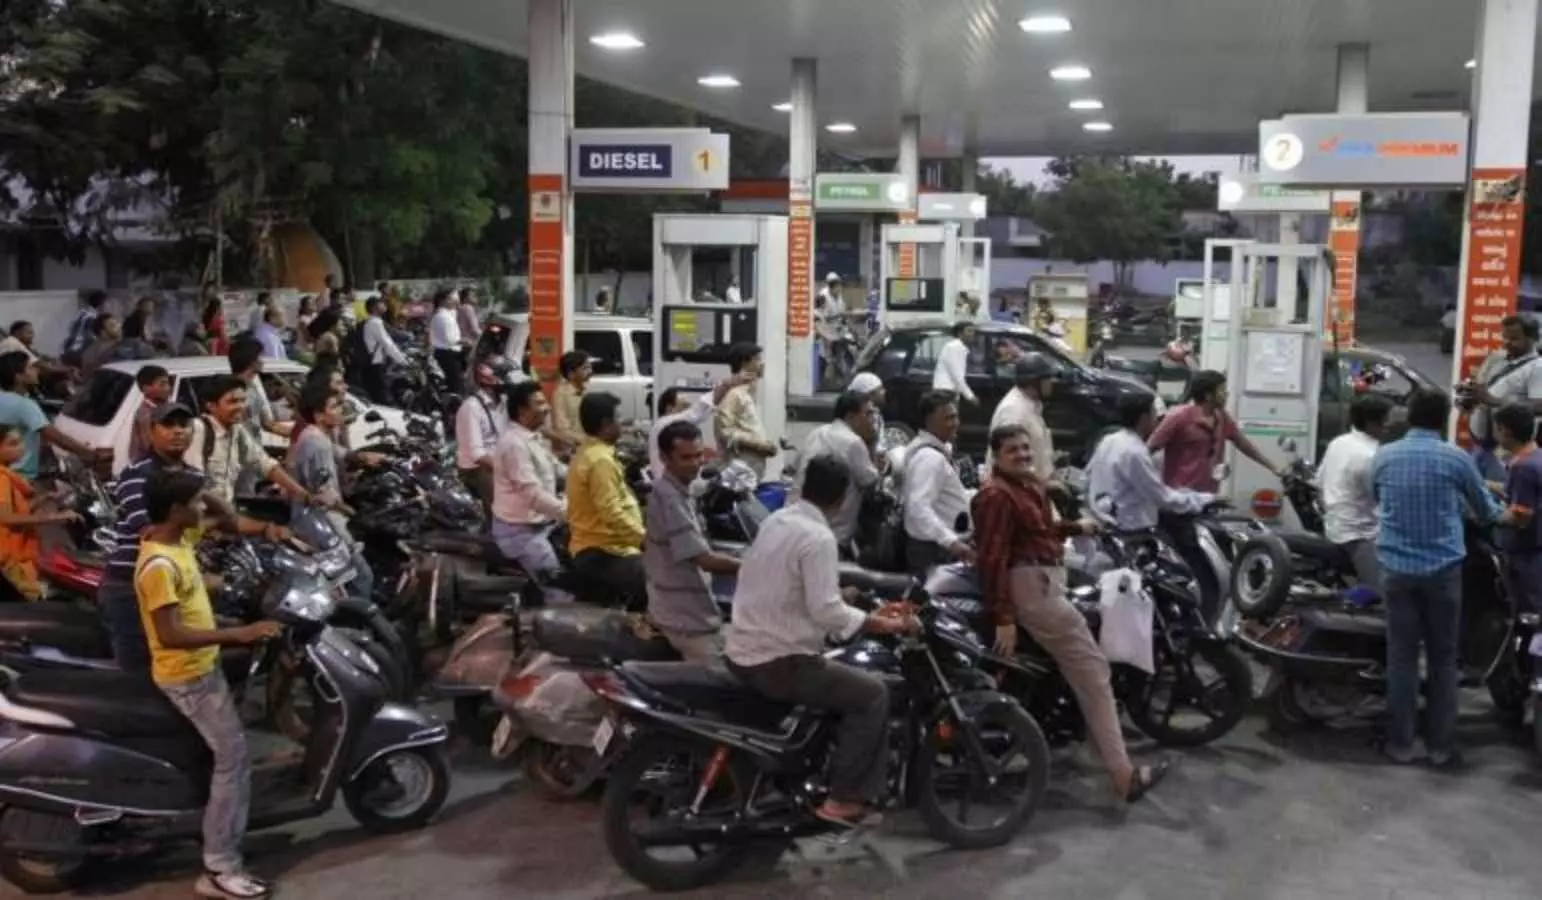 Petrol will not be available in Delhi from October 25 2022 without pollution certificate